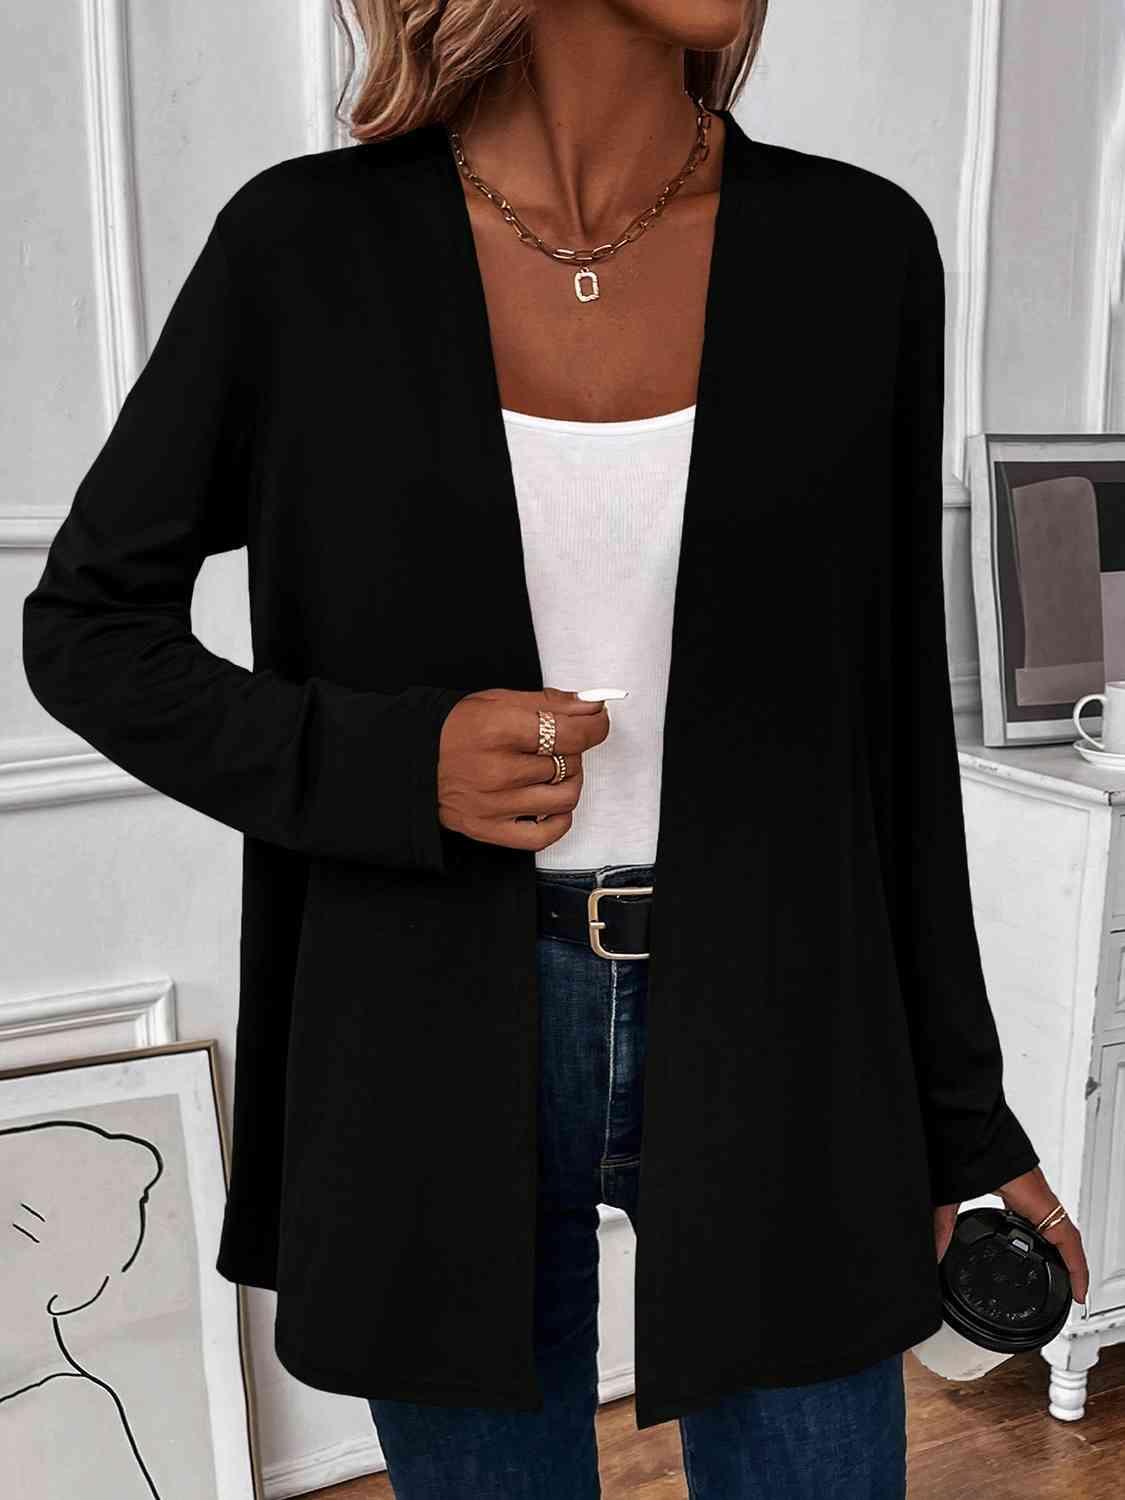 a woman wearing a black cardigan sweater and jeans